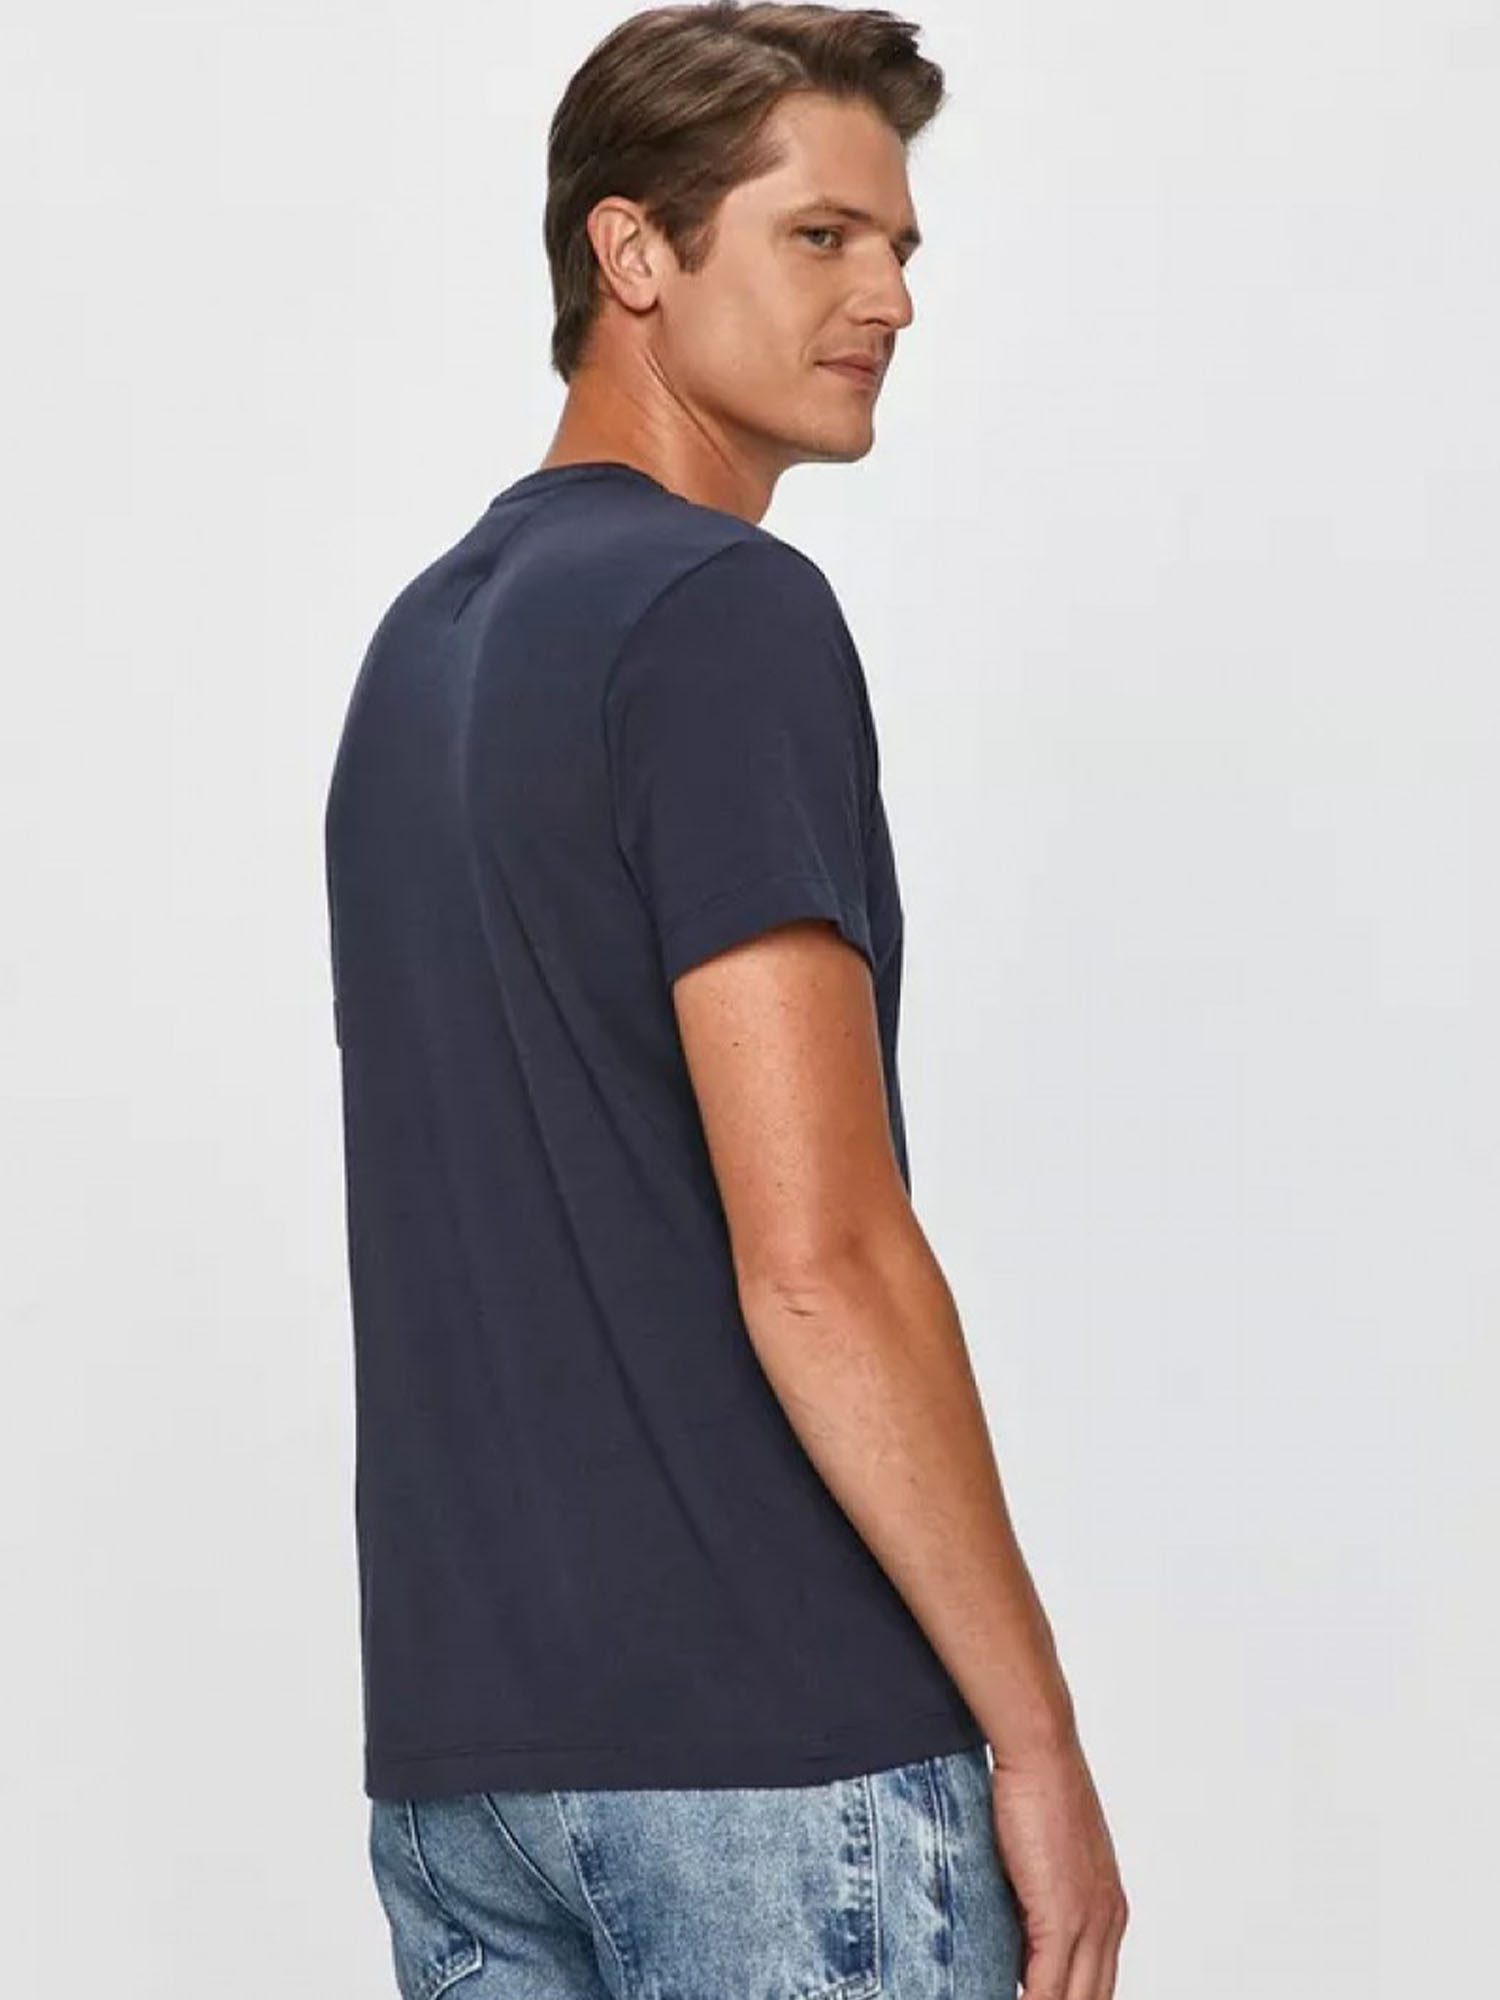 T-SHIRT UOMO TOMMY JEANS IN COTONE - BLU